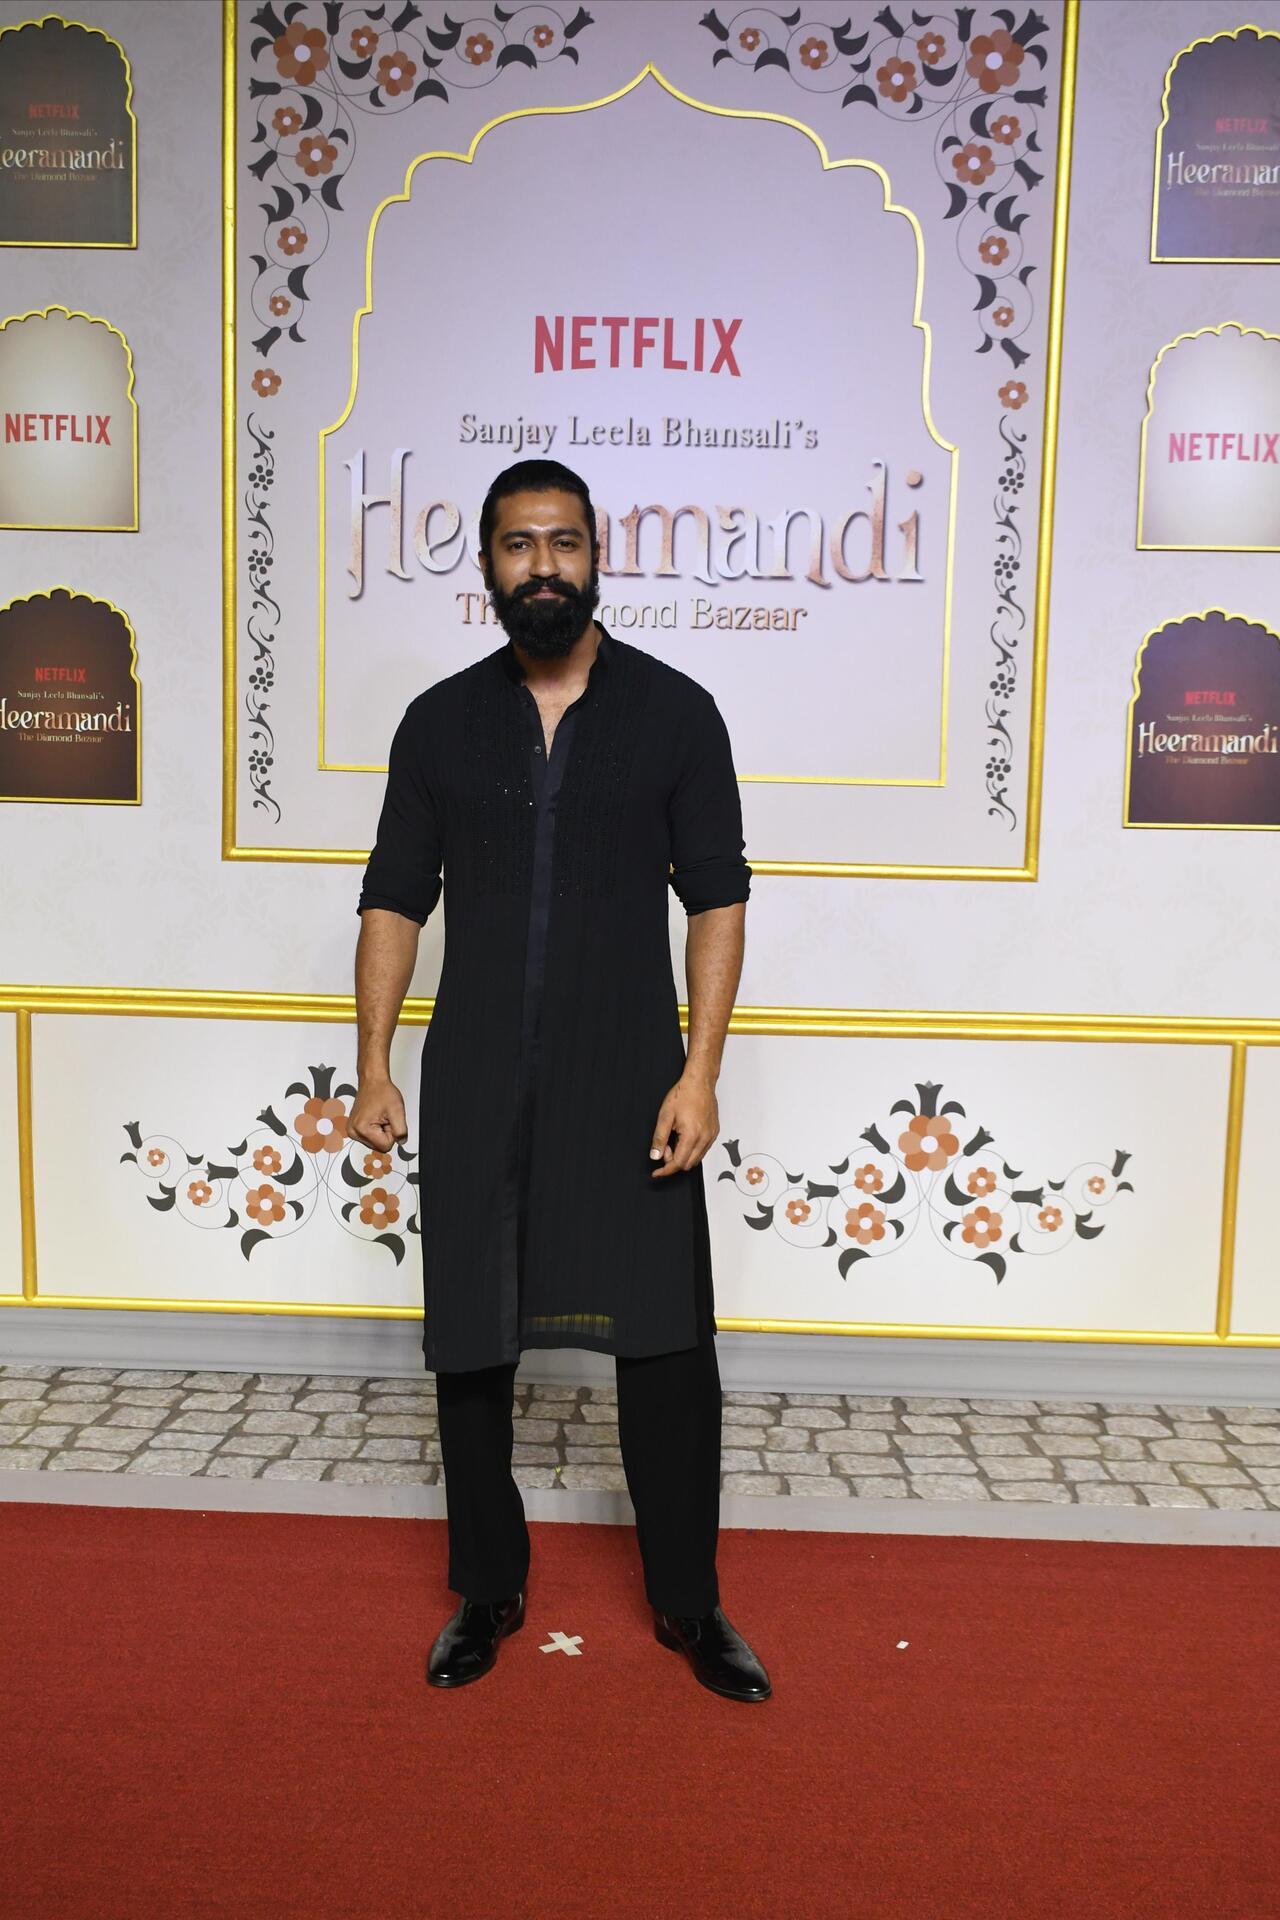 Vicky Kaushal opted for an all-black traditional look for the premiere. He will soon start filming for Bhansali's film 'Love and War' with Alia Bhatt and Ranbir Kapoor